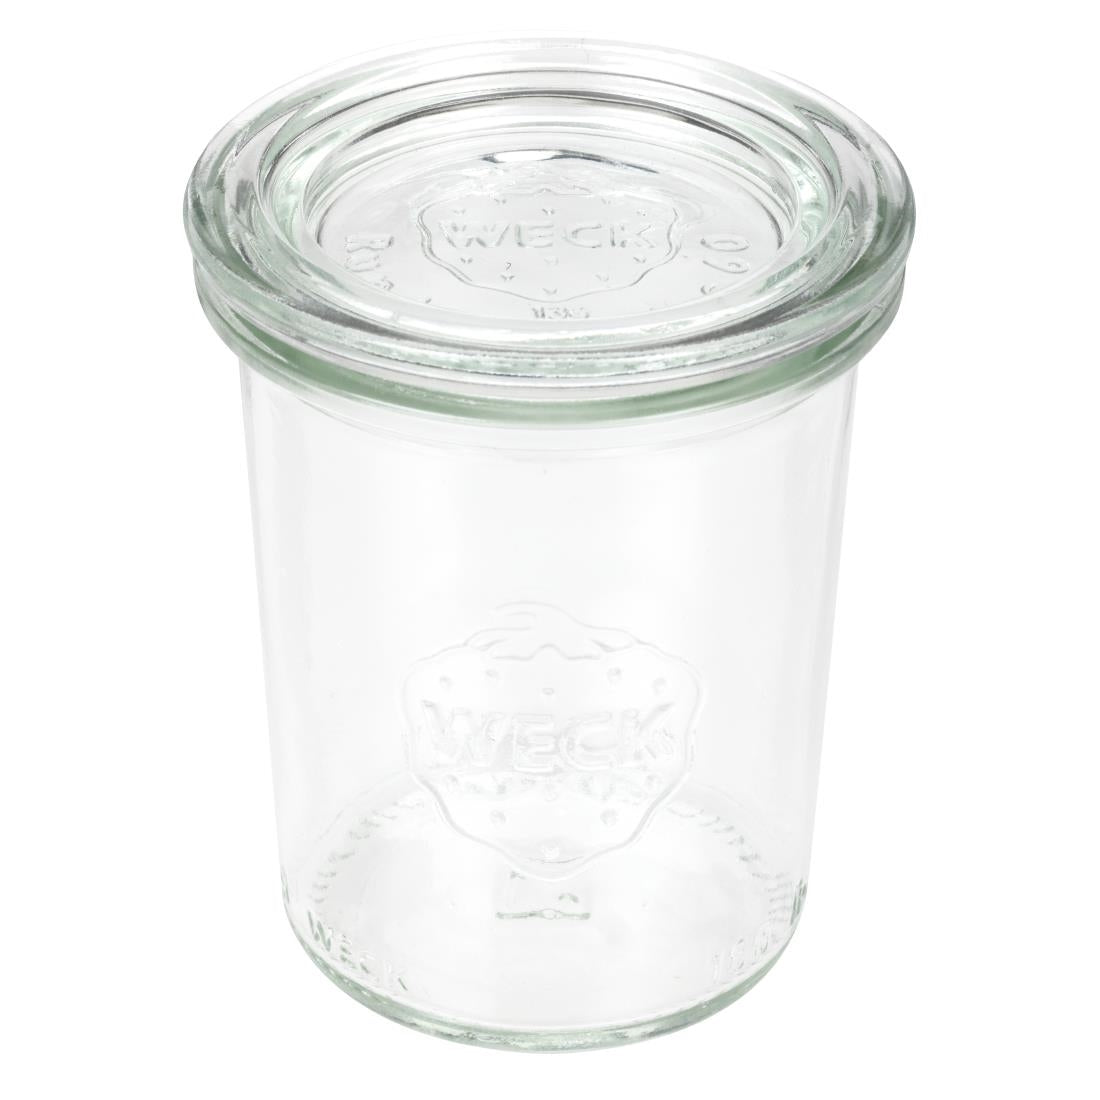 GH388 APS 160ml Weck Jar (Pack of 12) JD Catering Equipment Solutions Ltd